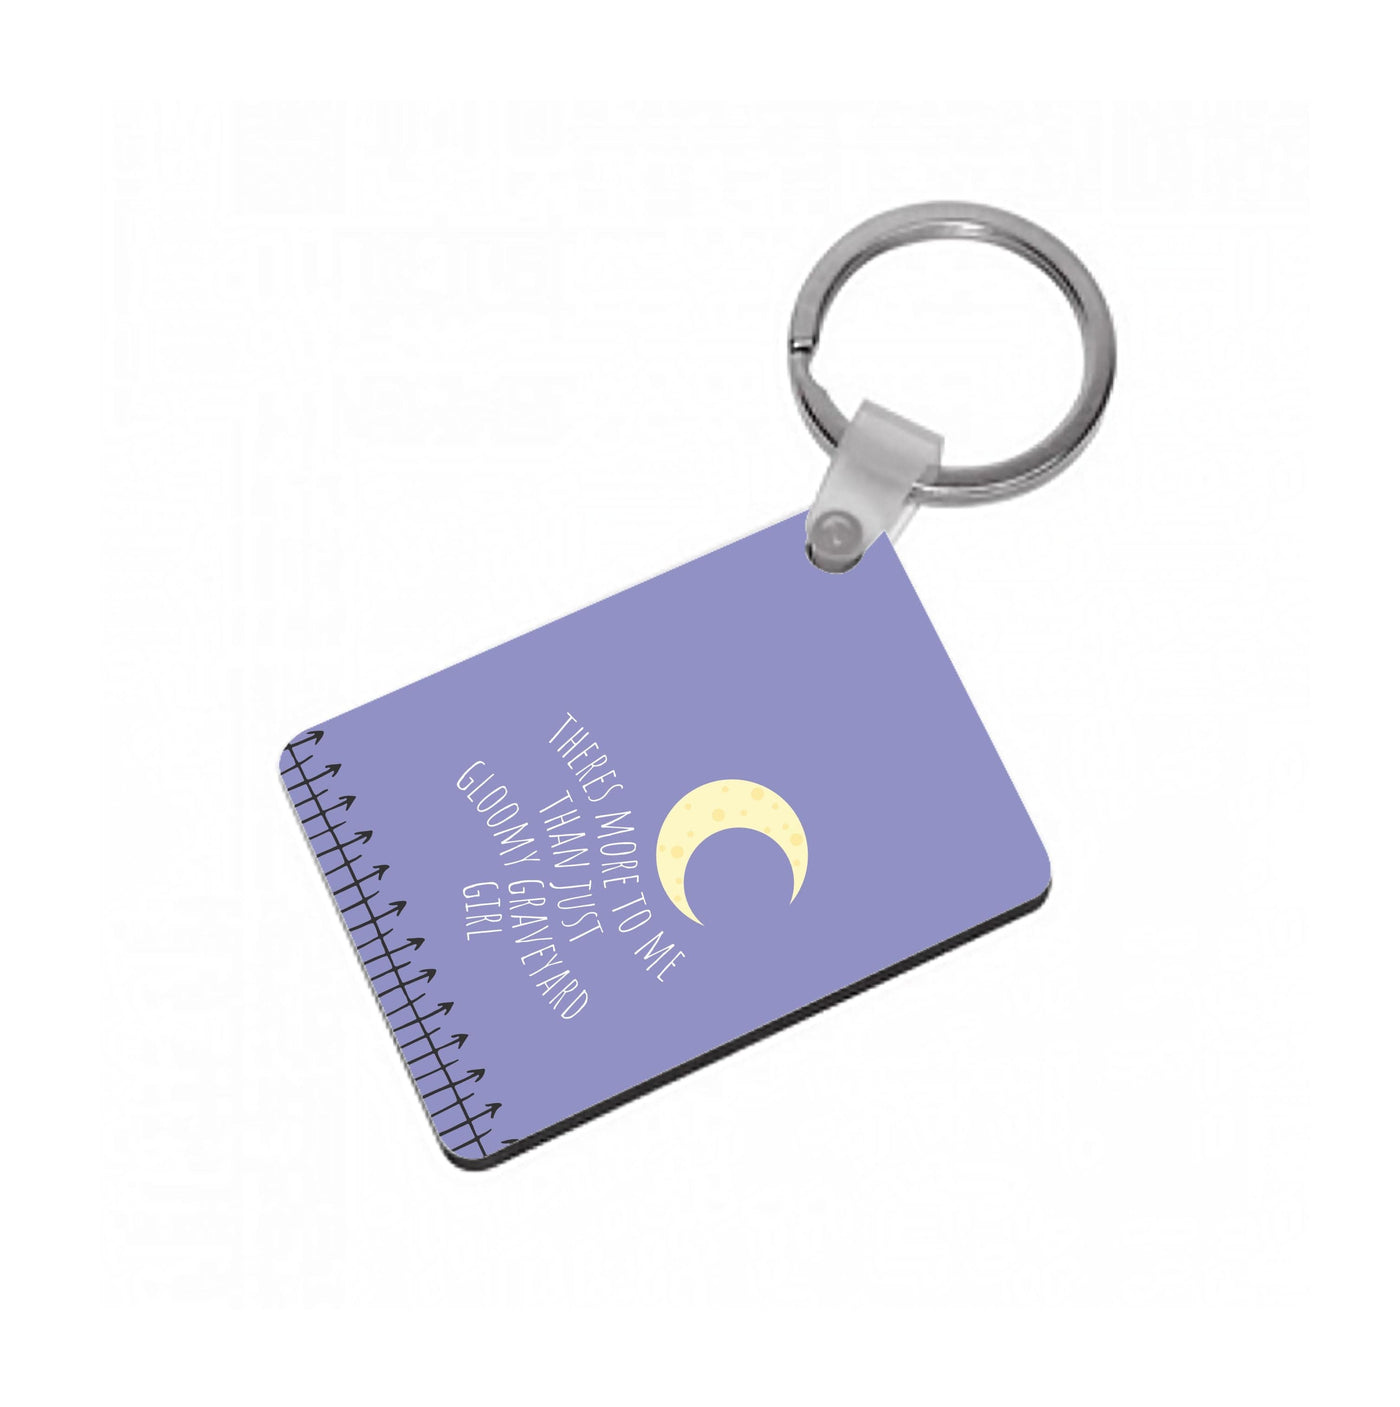 Theres More To Me - TV Quotes Keyring